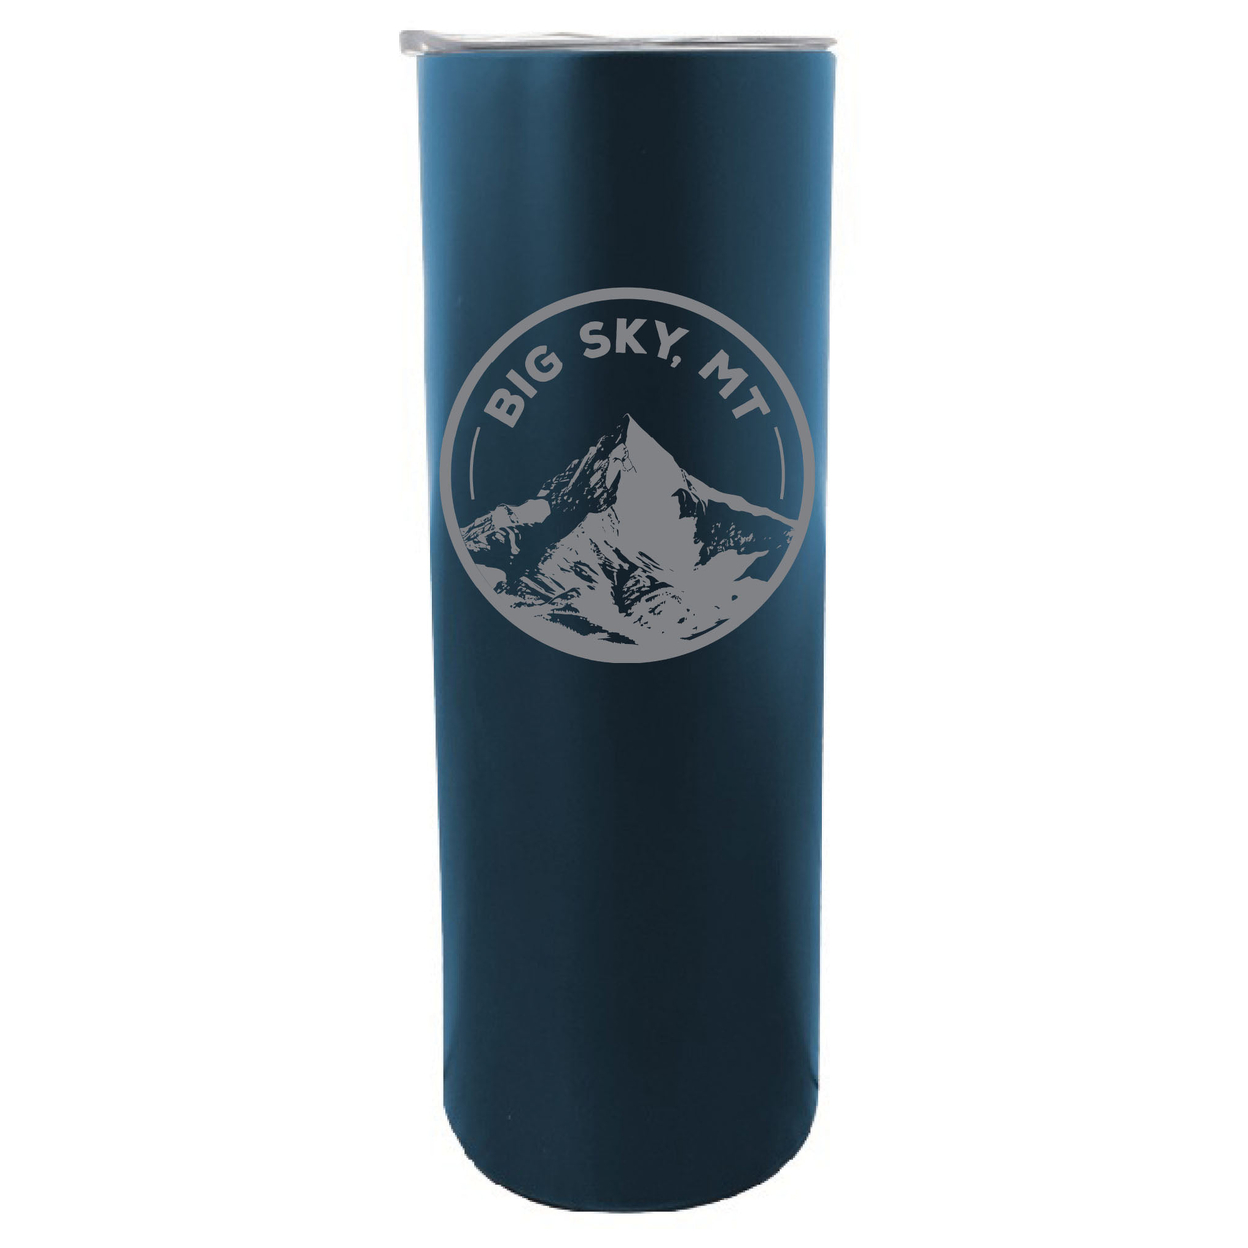 Big Sky Montana Souvenir 20 Oz Engraved Insulated Stainless Steel Skinny Tumbler - Navy,,4-Pack